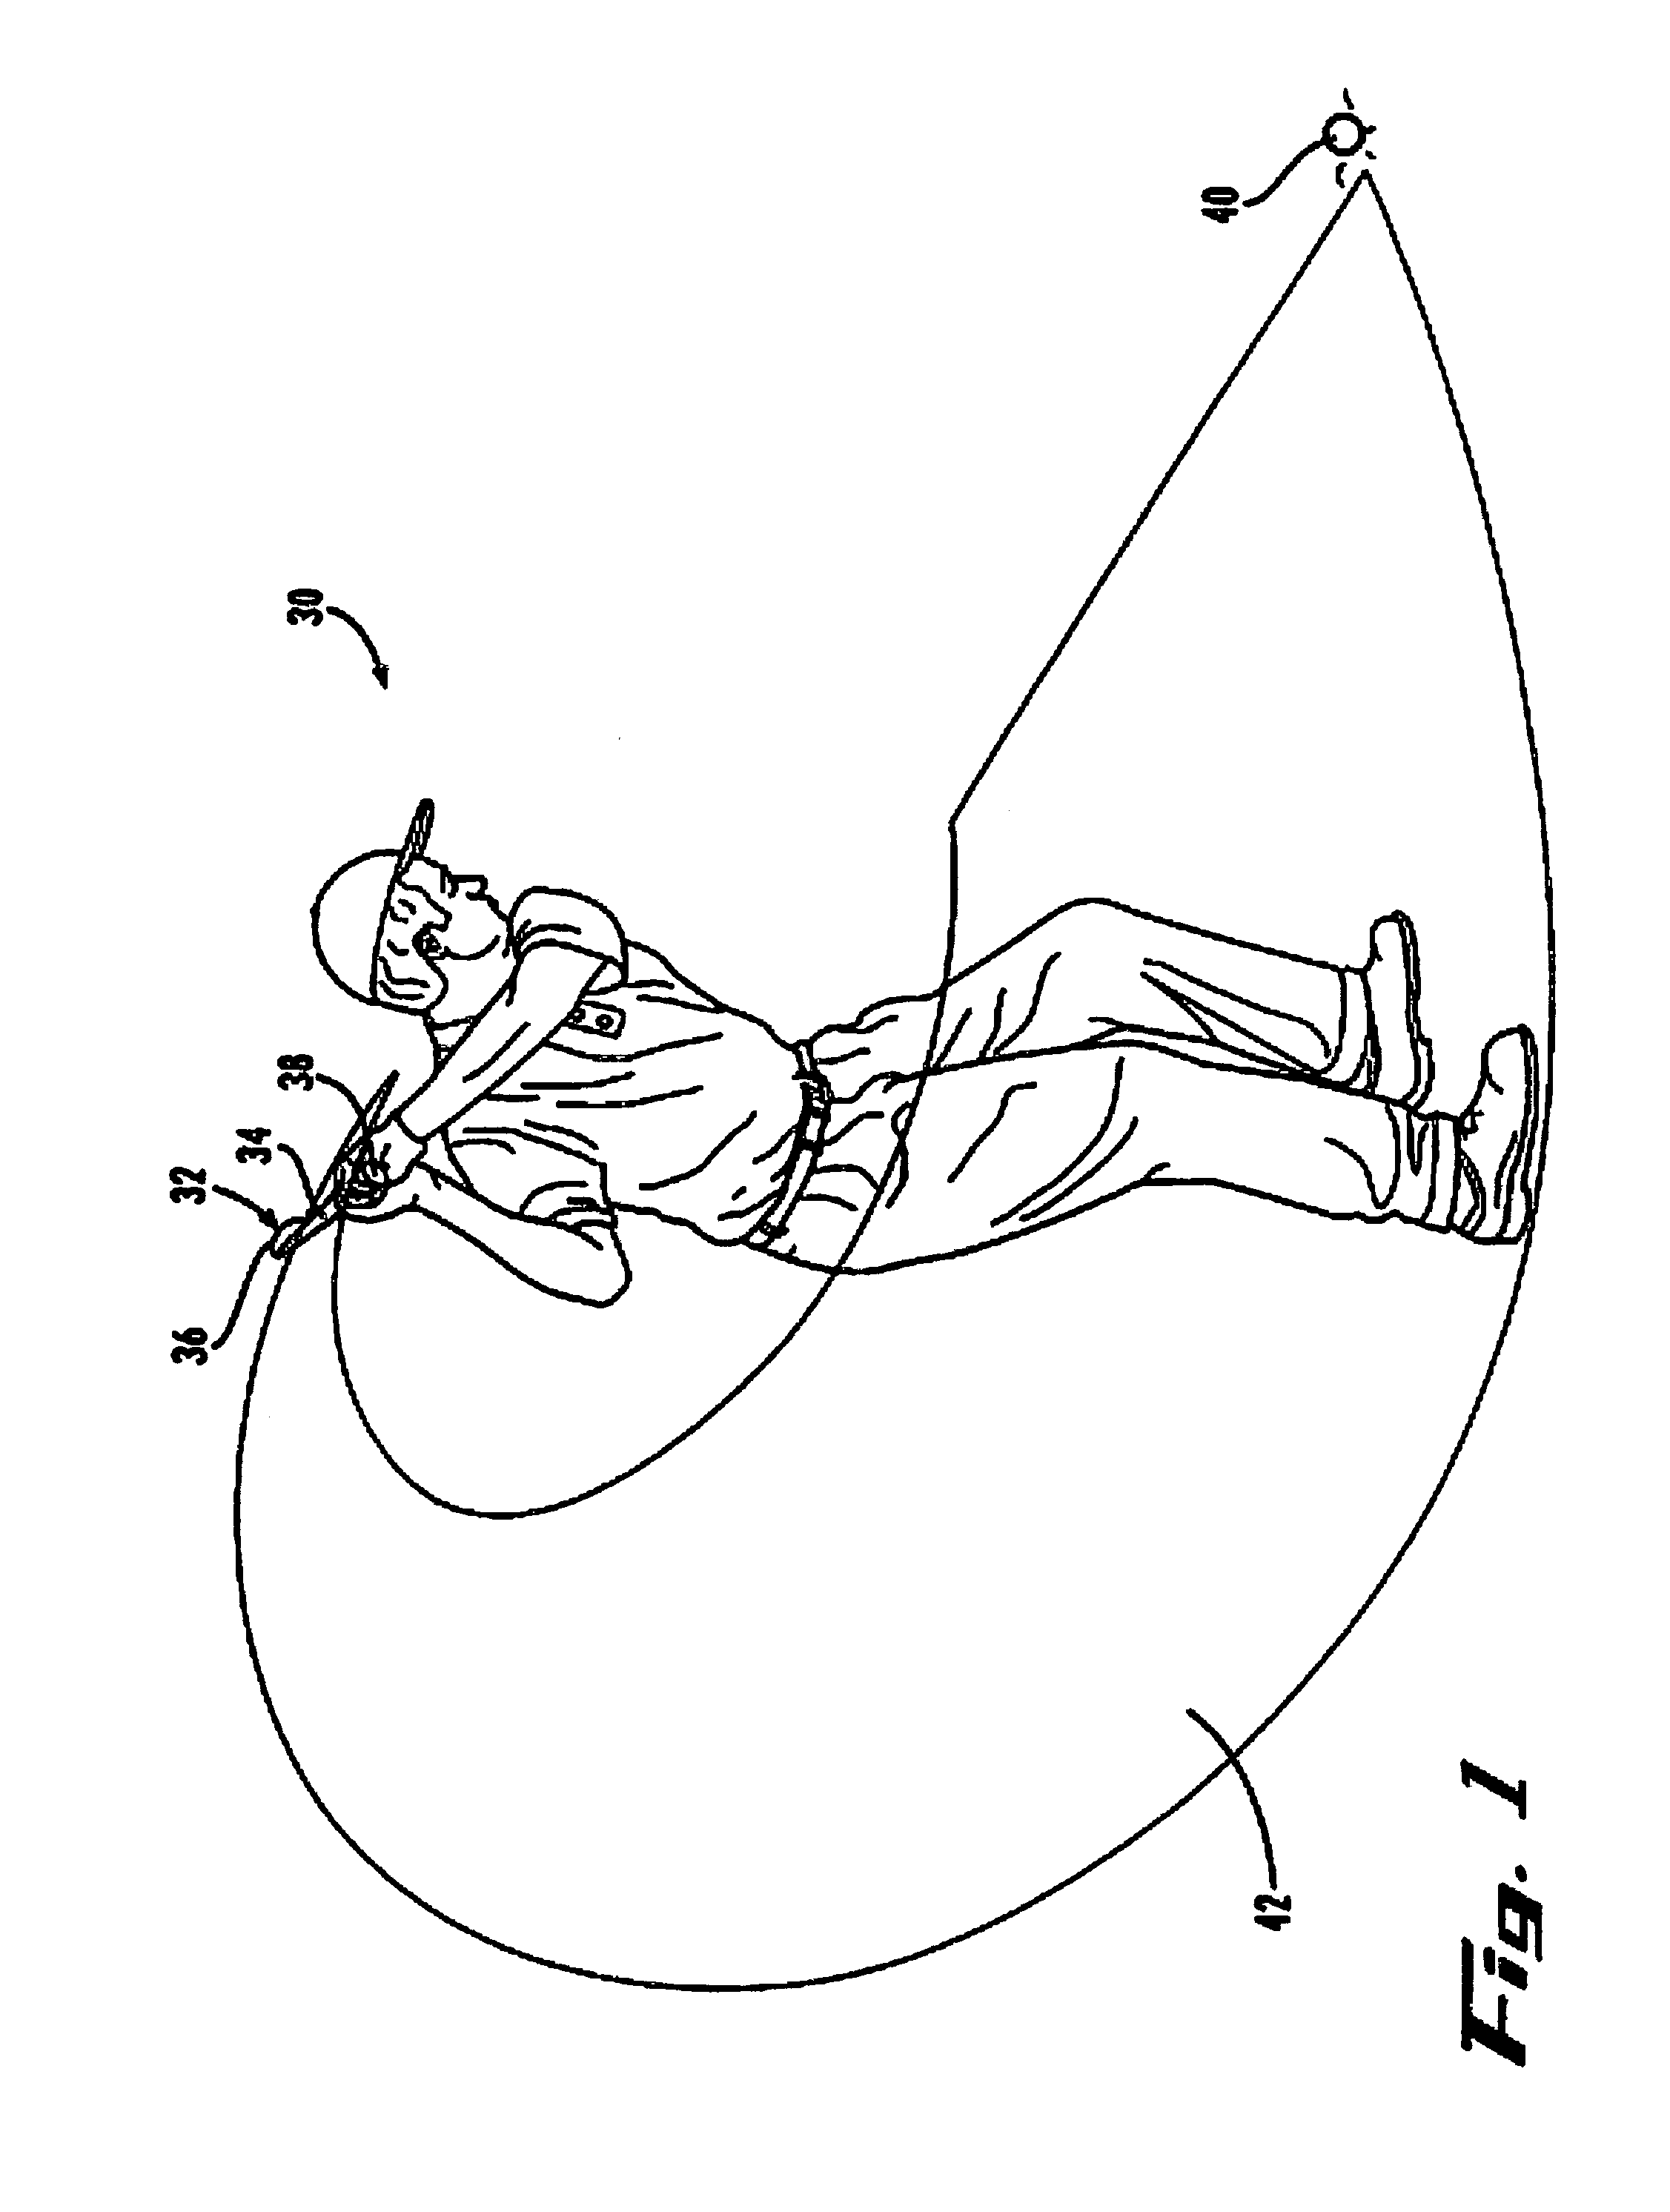 Multi-Rotor Apparatus and Method for Motion Sculpting